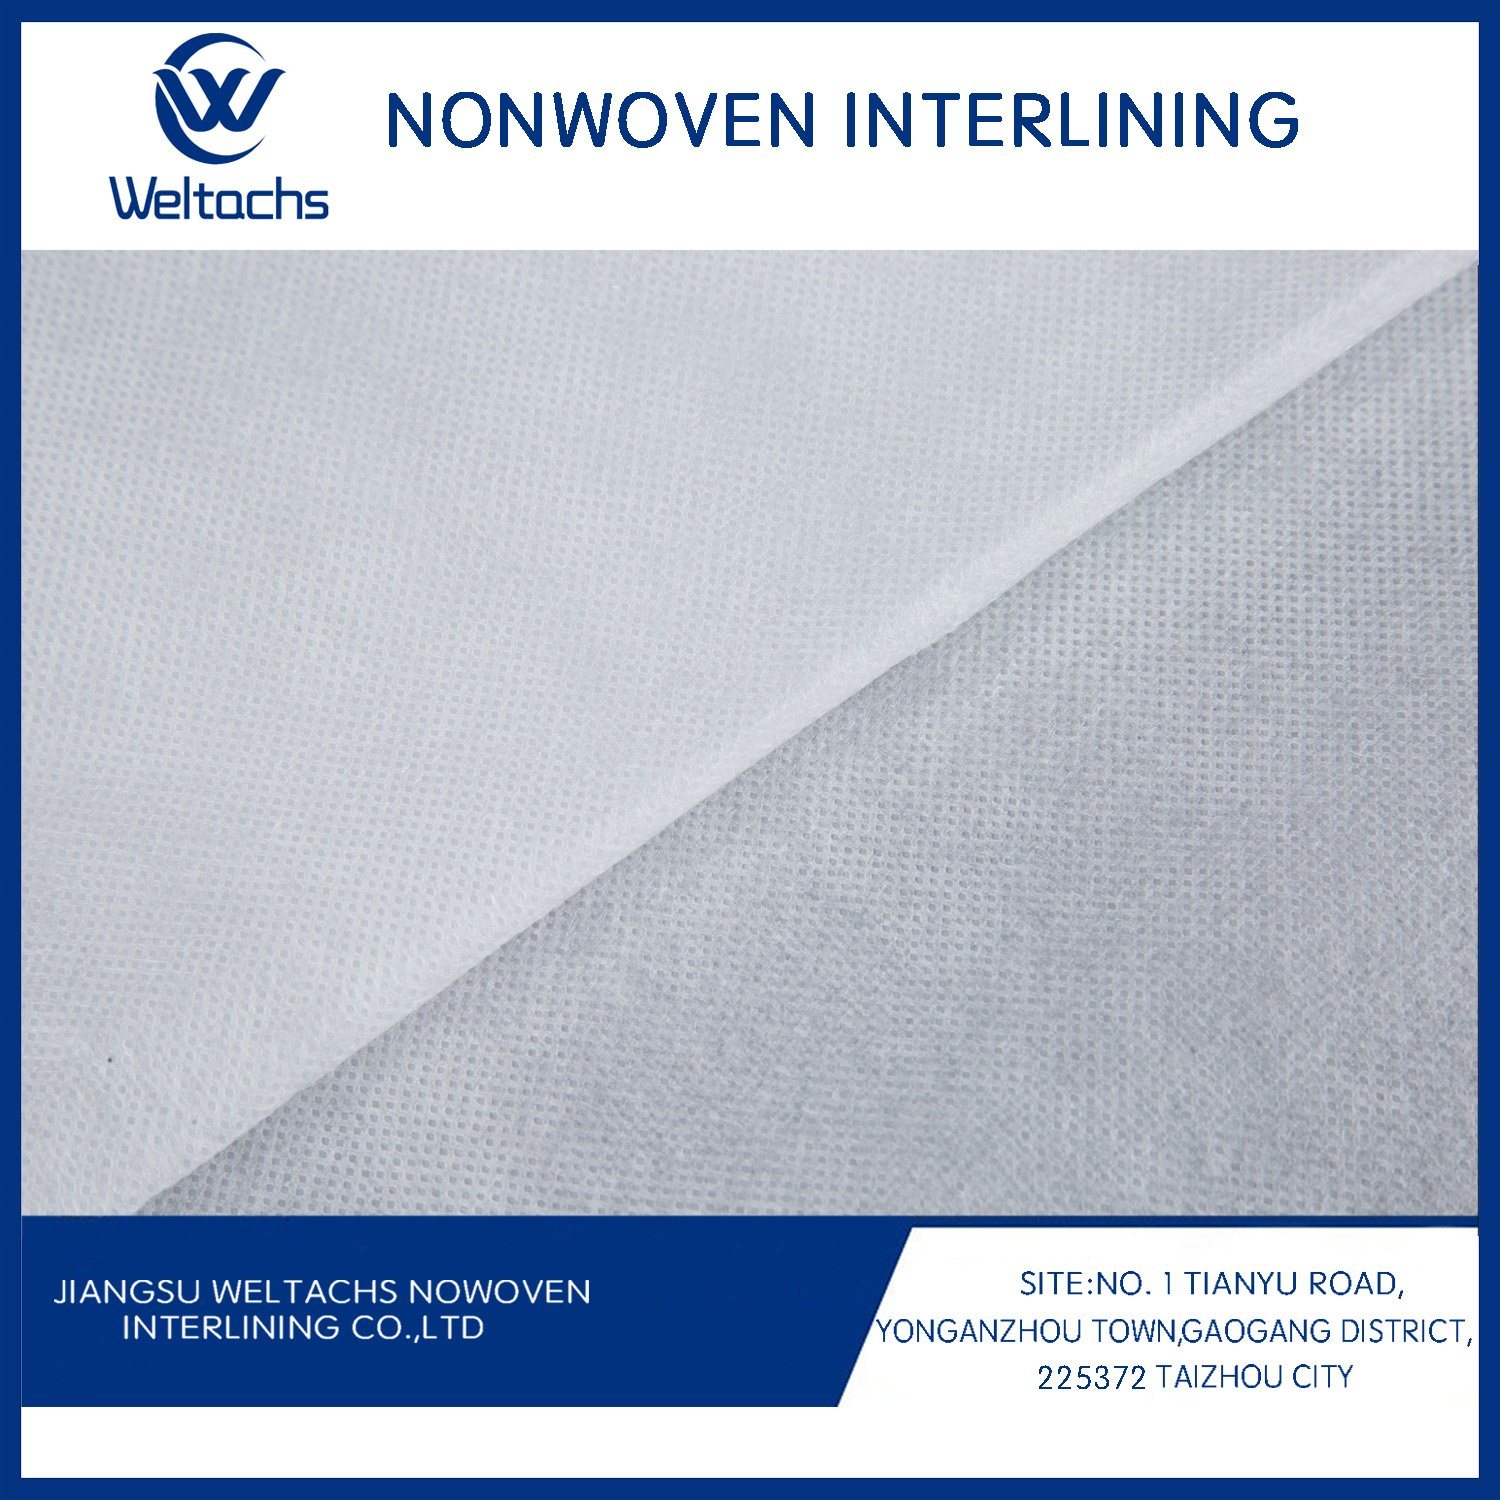 Hot Sale Half Polyester Nonwoven Interlining for Garment